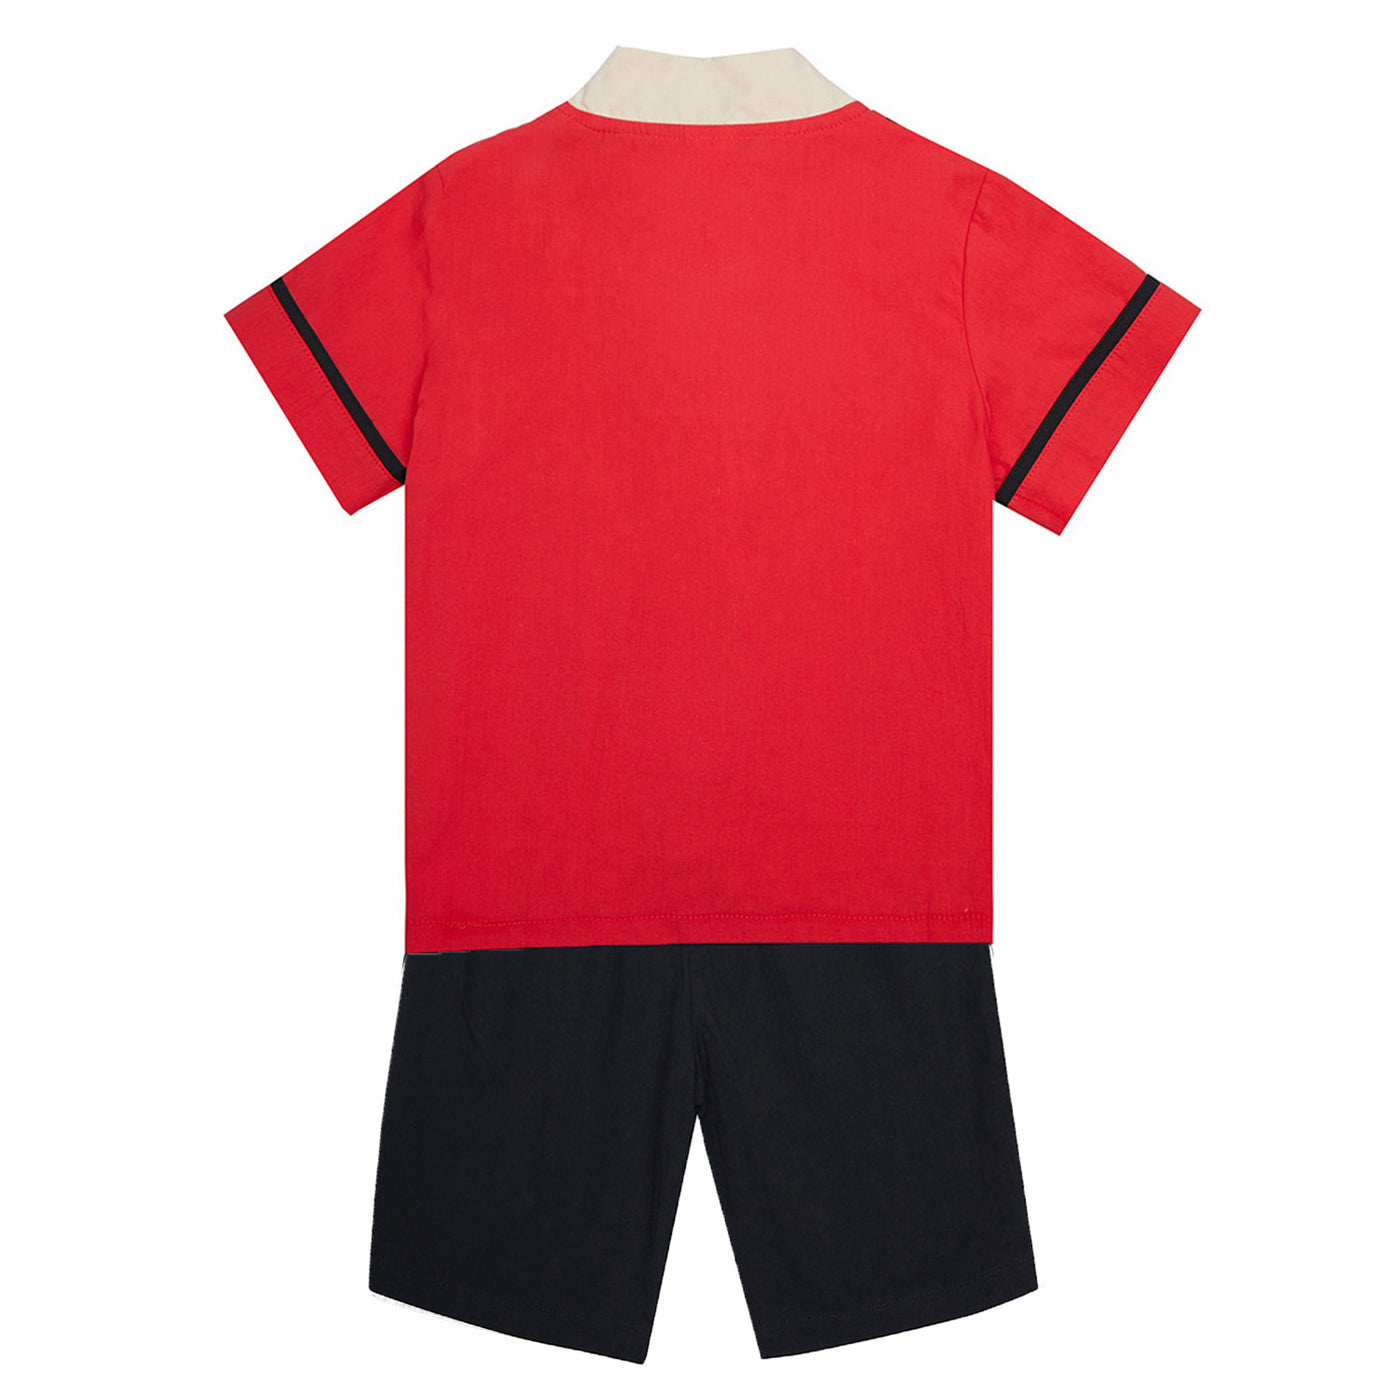 Baby Kids Boys Fake Two Piece Cheongsam Set Red Top n Black Shorts CNY Chinese New Year Outfit - Little Kooma